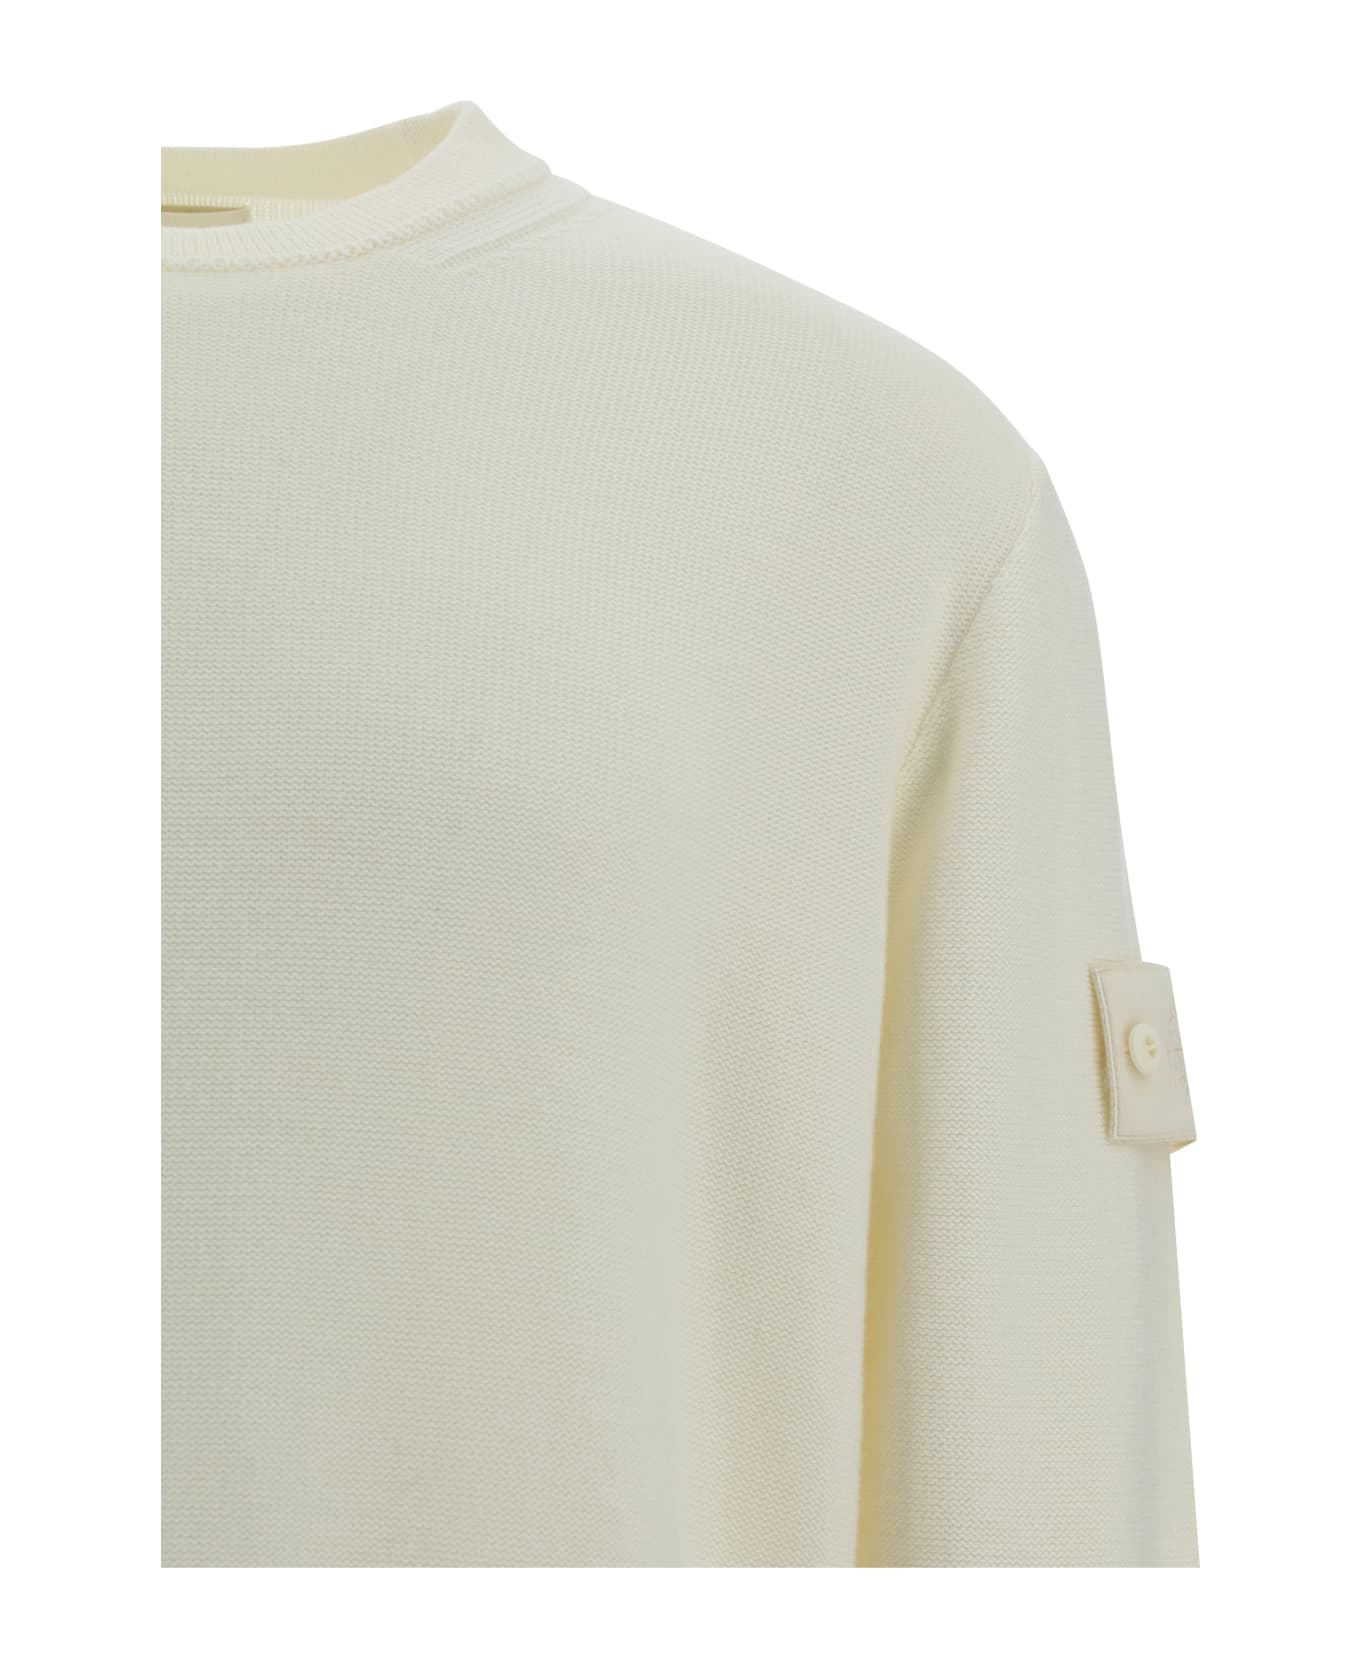 Stone Island Ghost Sweater - Bco Naturale ニットウェア